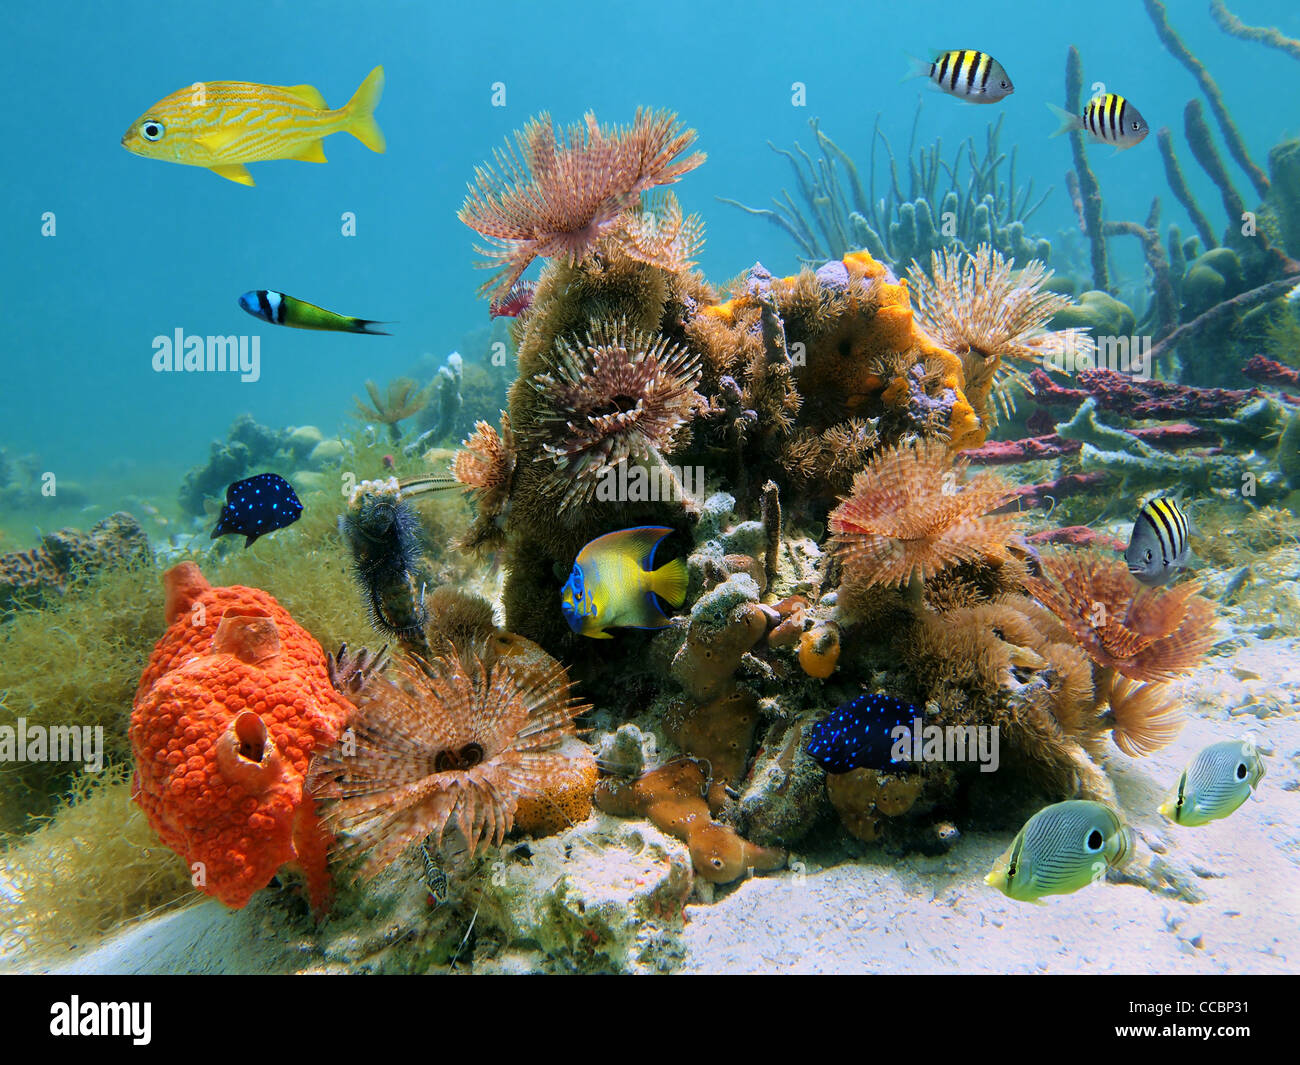 Colorful underwater marine life with tropical fish and feather duster marine worms in the Caribbean sea Stock Photo